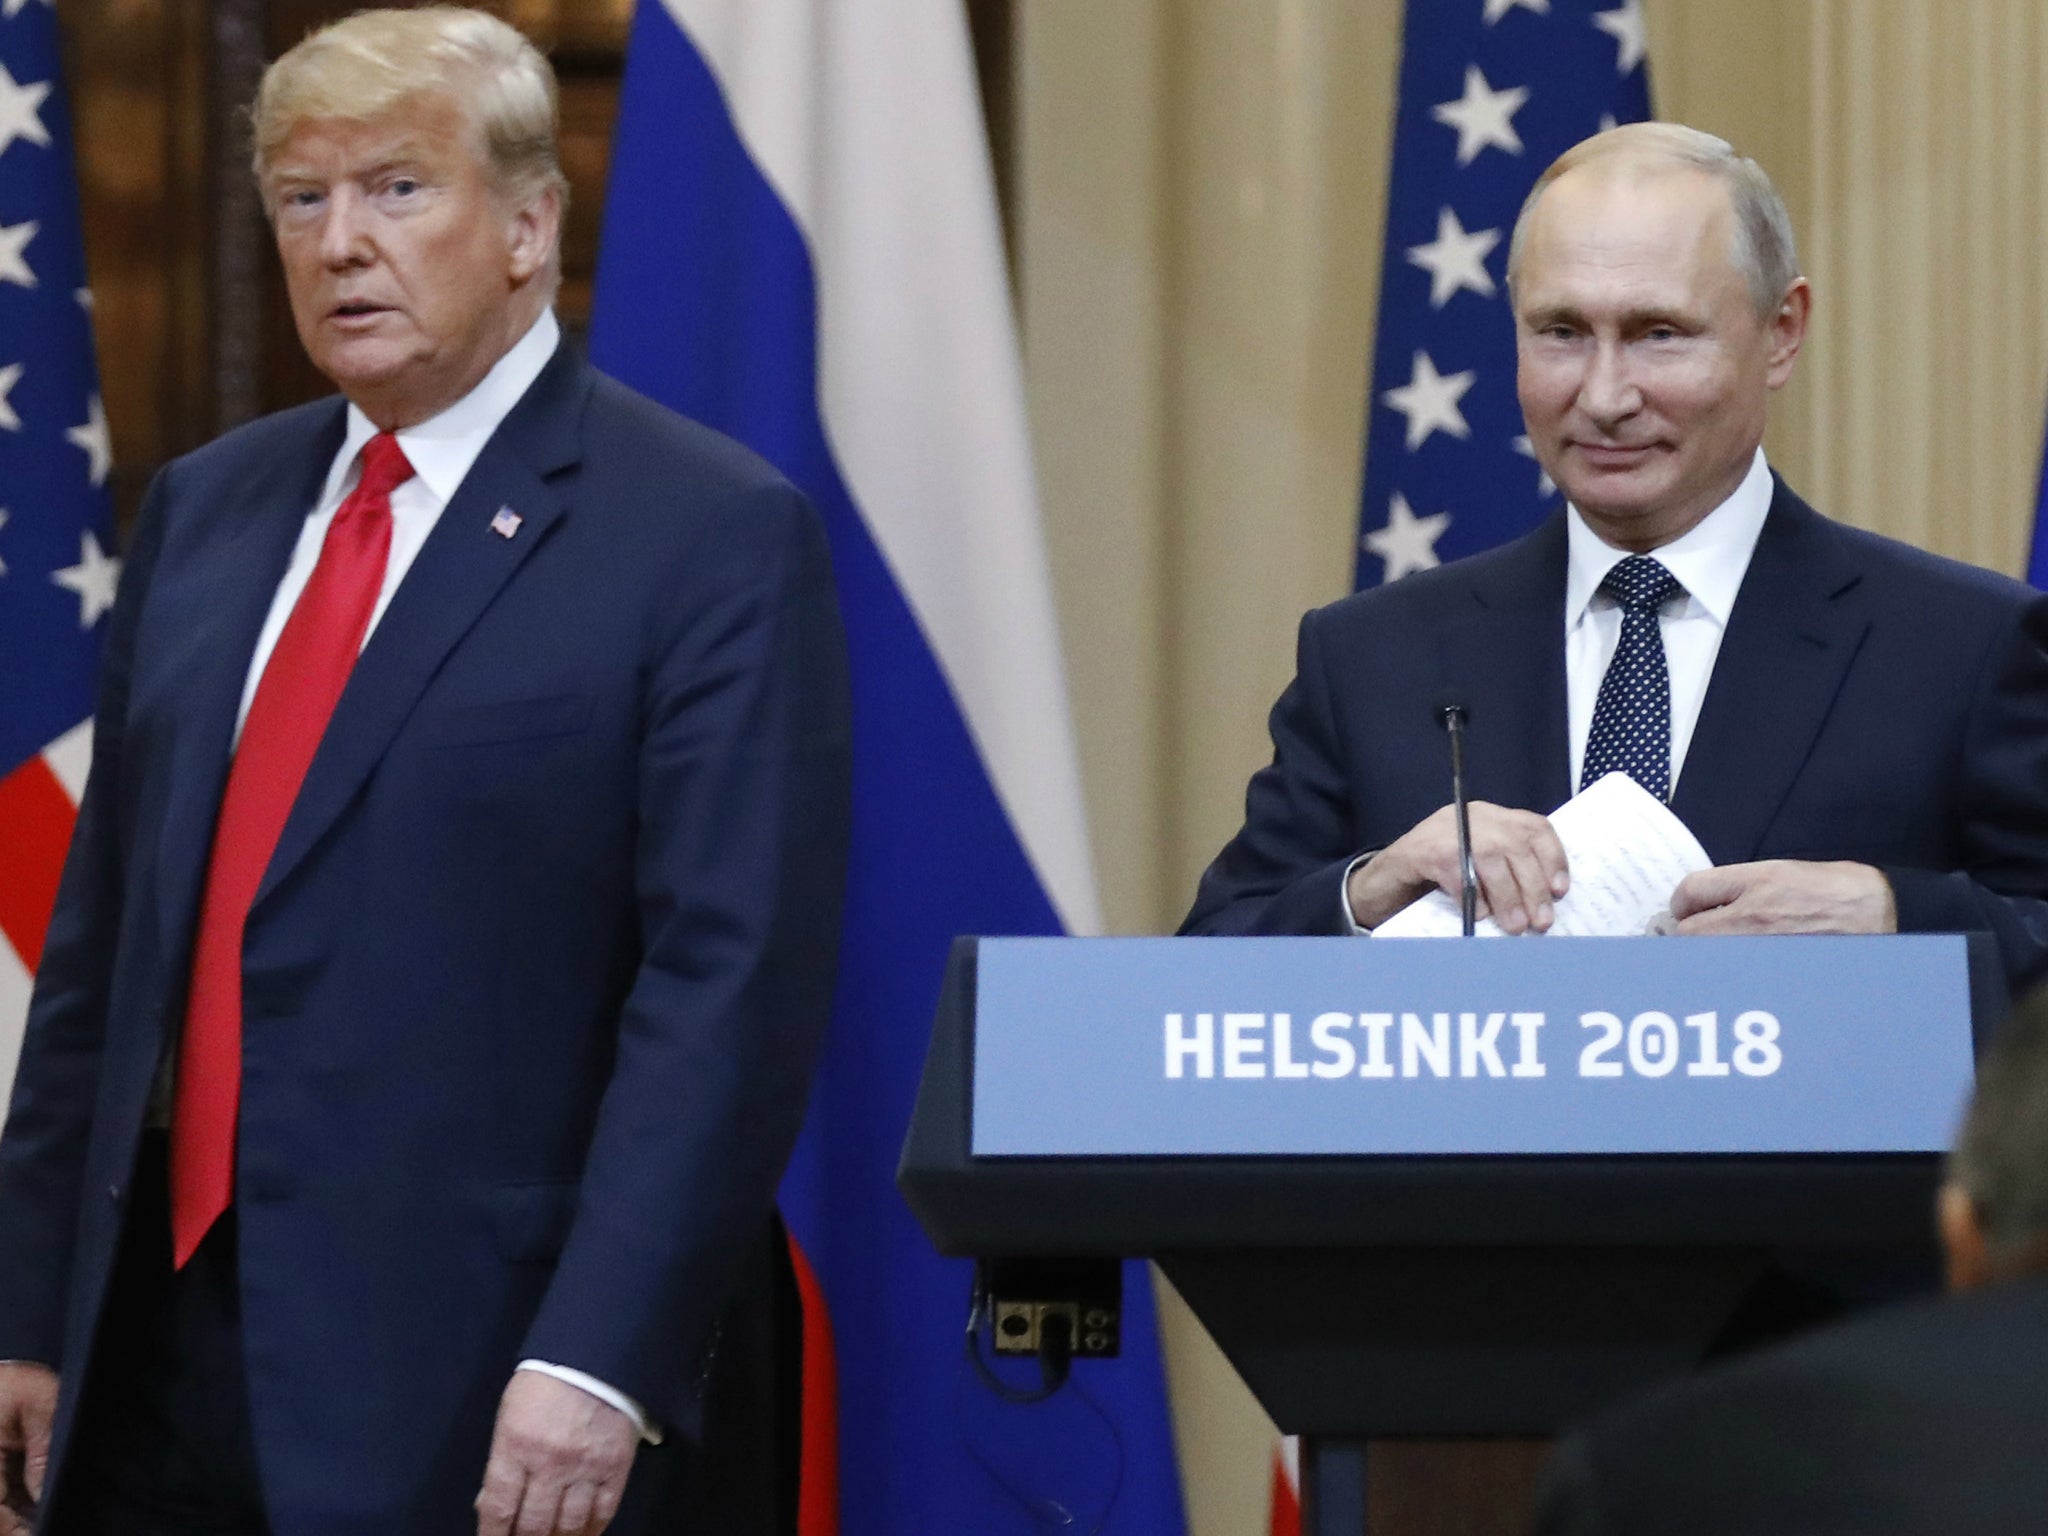 US President Donald Trump and Russian President Vladimir Putin reportedly reached a joint security agreement while in Helsinki, Finland, on 16 July 2018.